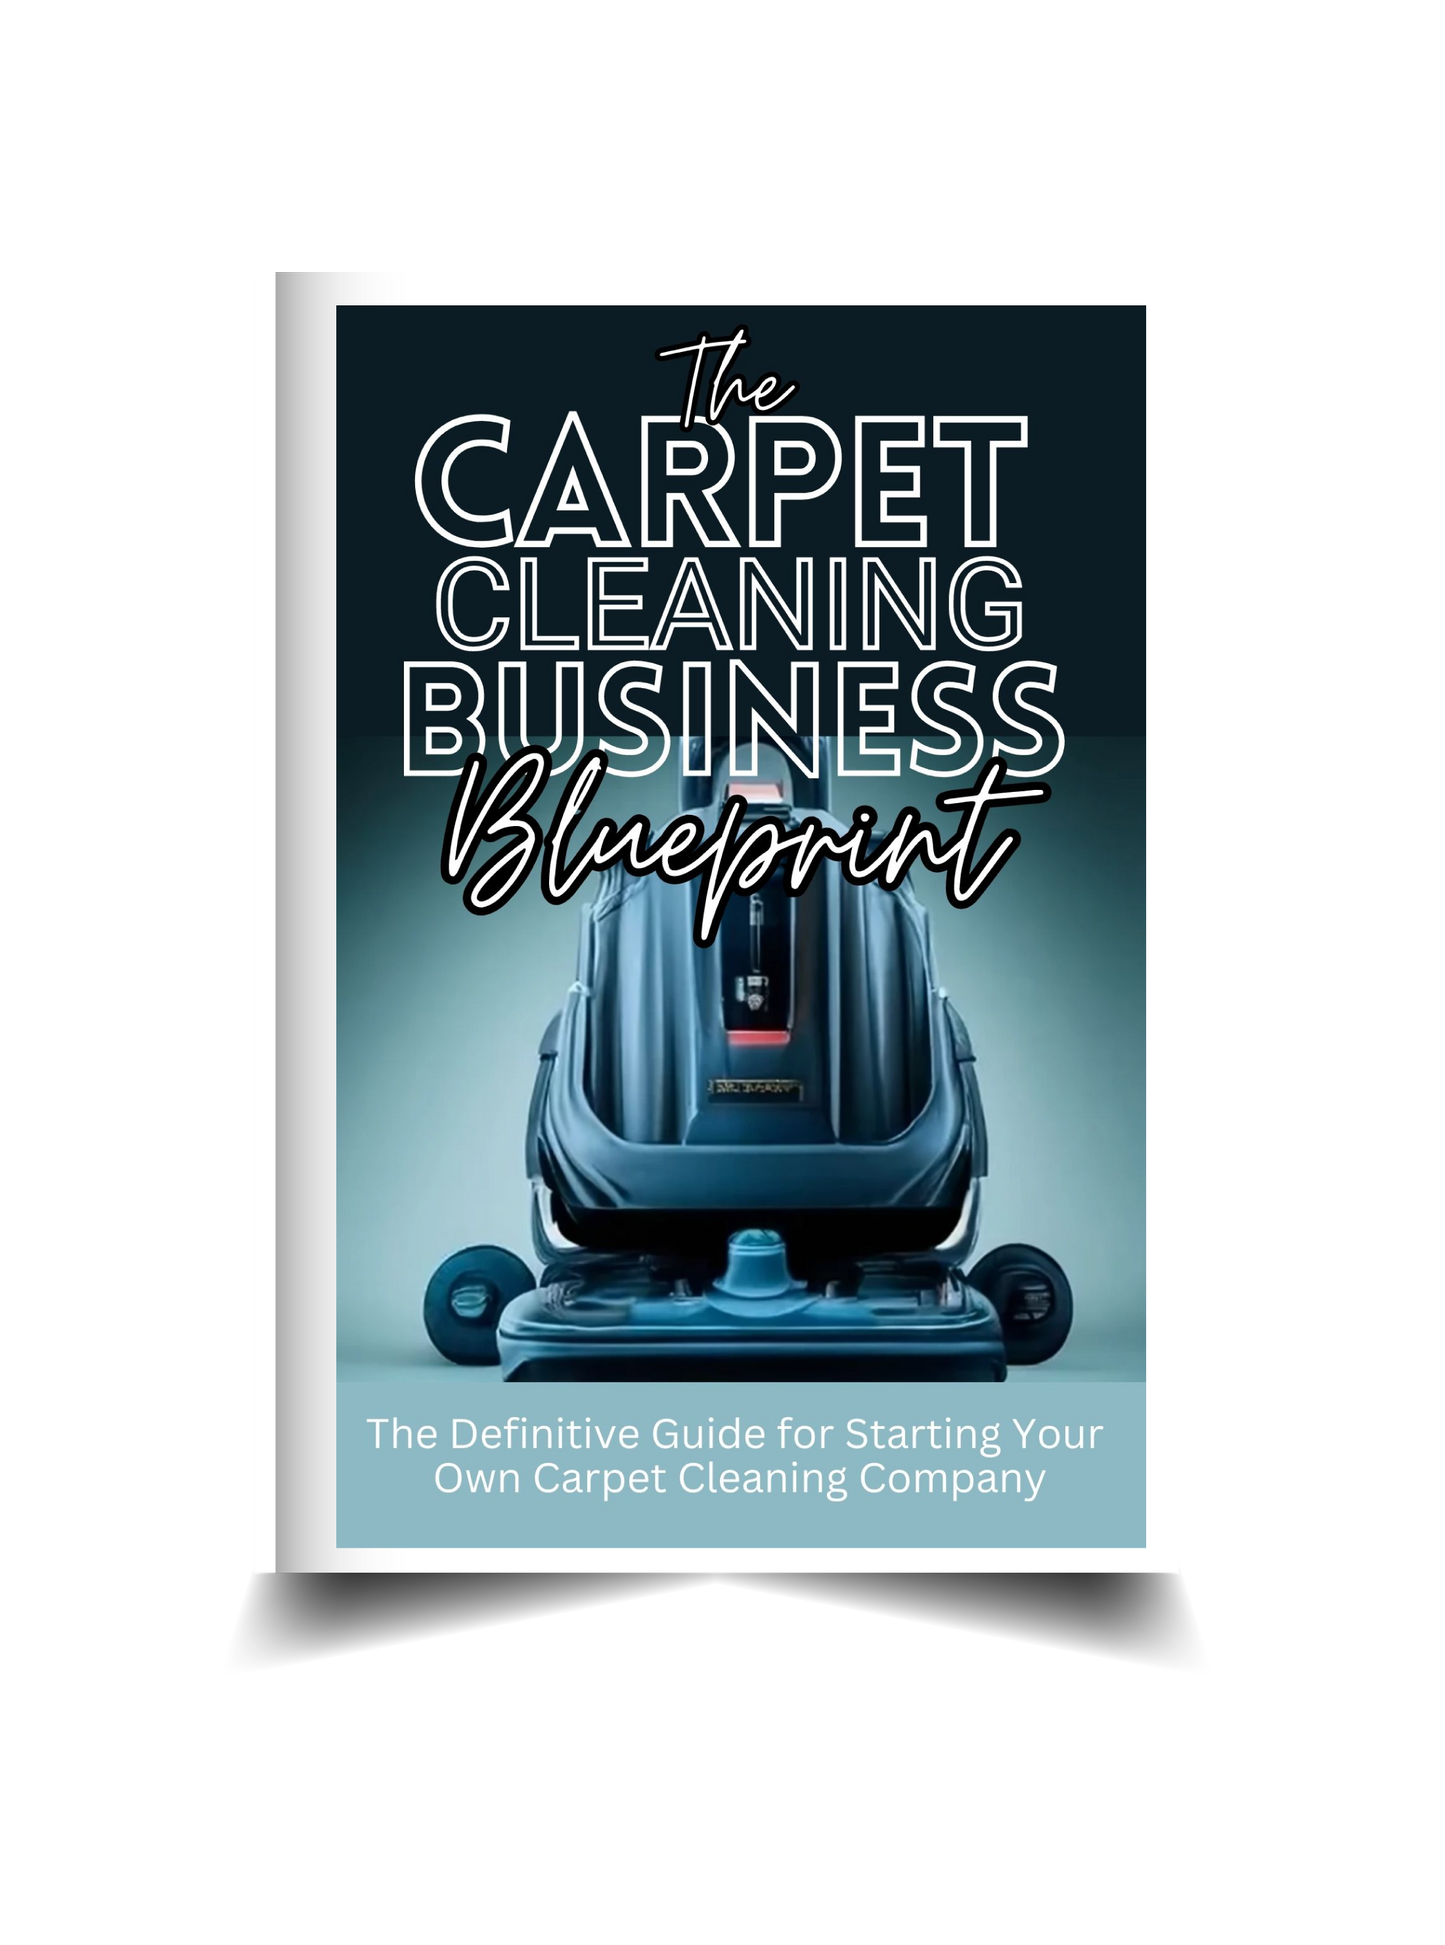 The Carpet Cleaning Business Blueprint: The Definitive Guide for Starting Your Own Carpet Cleaning Company